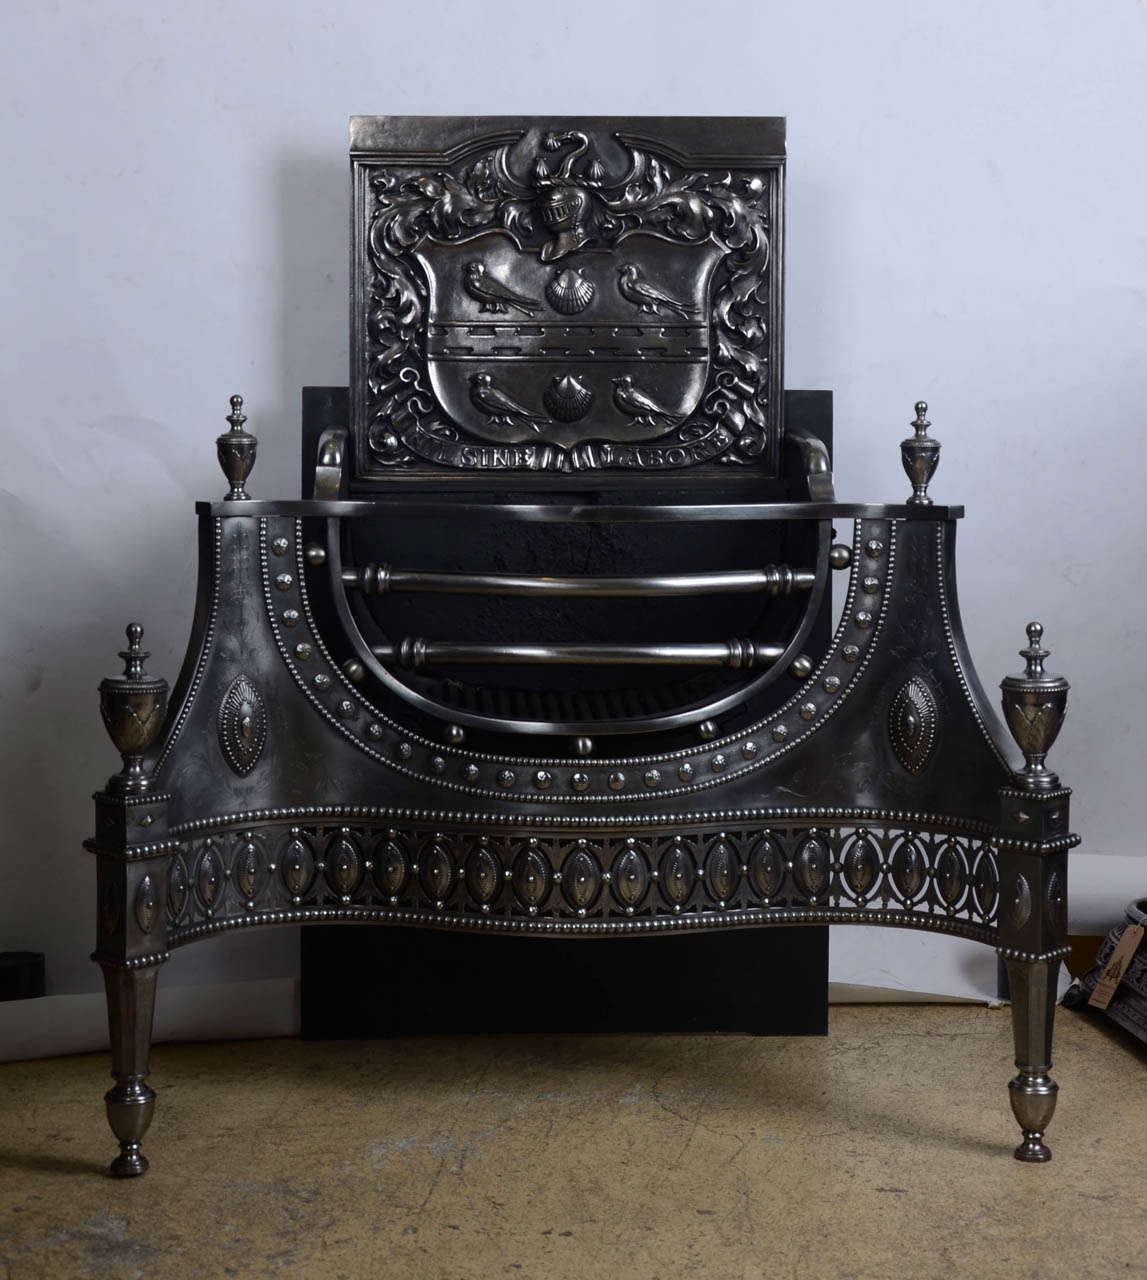 A pair of exceptional antique fire baskets removed from the former Hampstead mansion of Sir Joseph Beecham.

These impressive fire grates are in the neo-classical manner, with railed serpentine baskets, out-swept spandrels and majestic urn finials